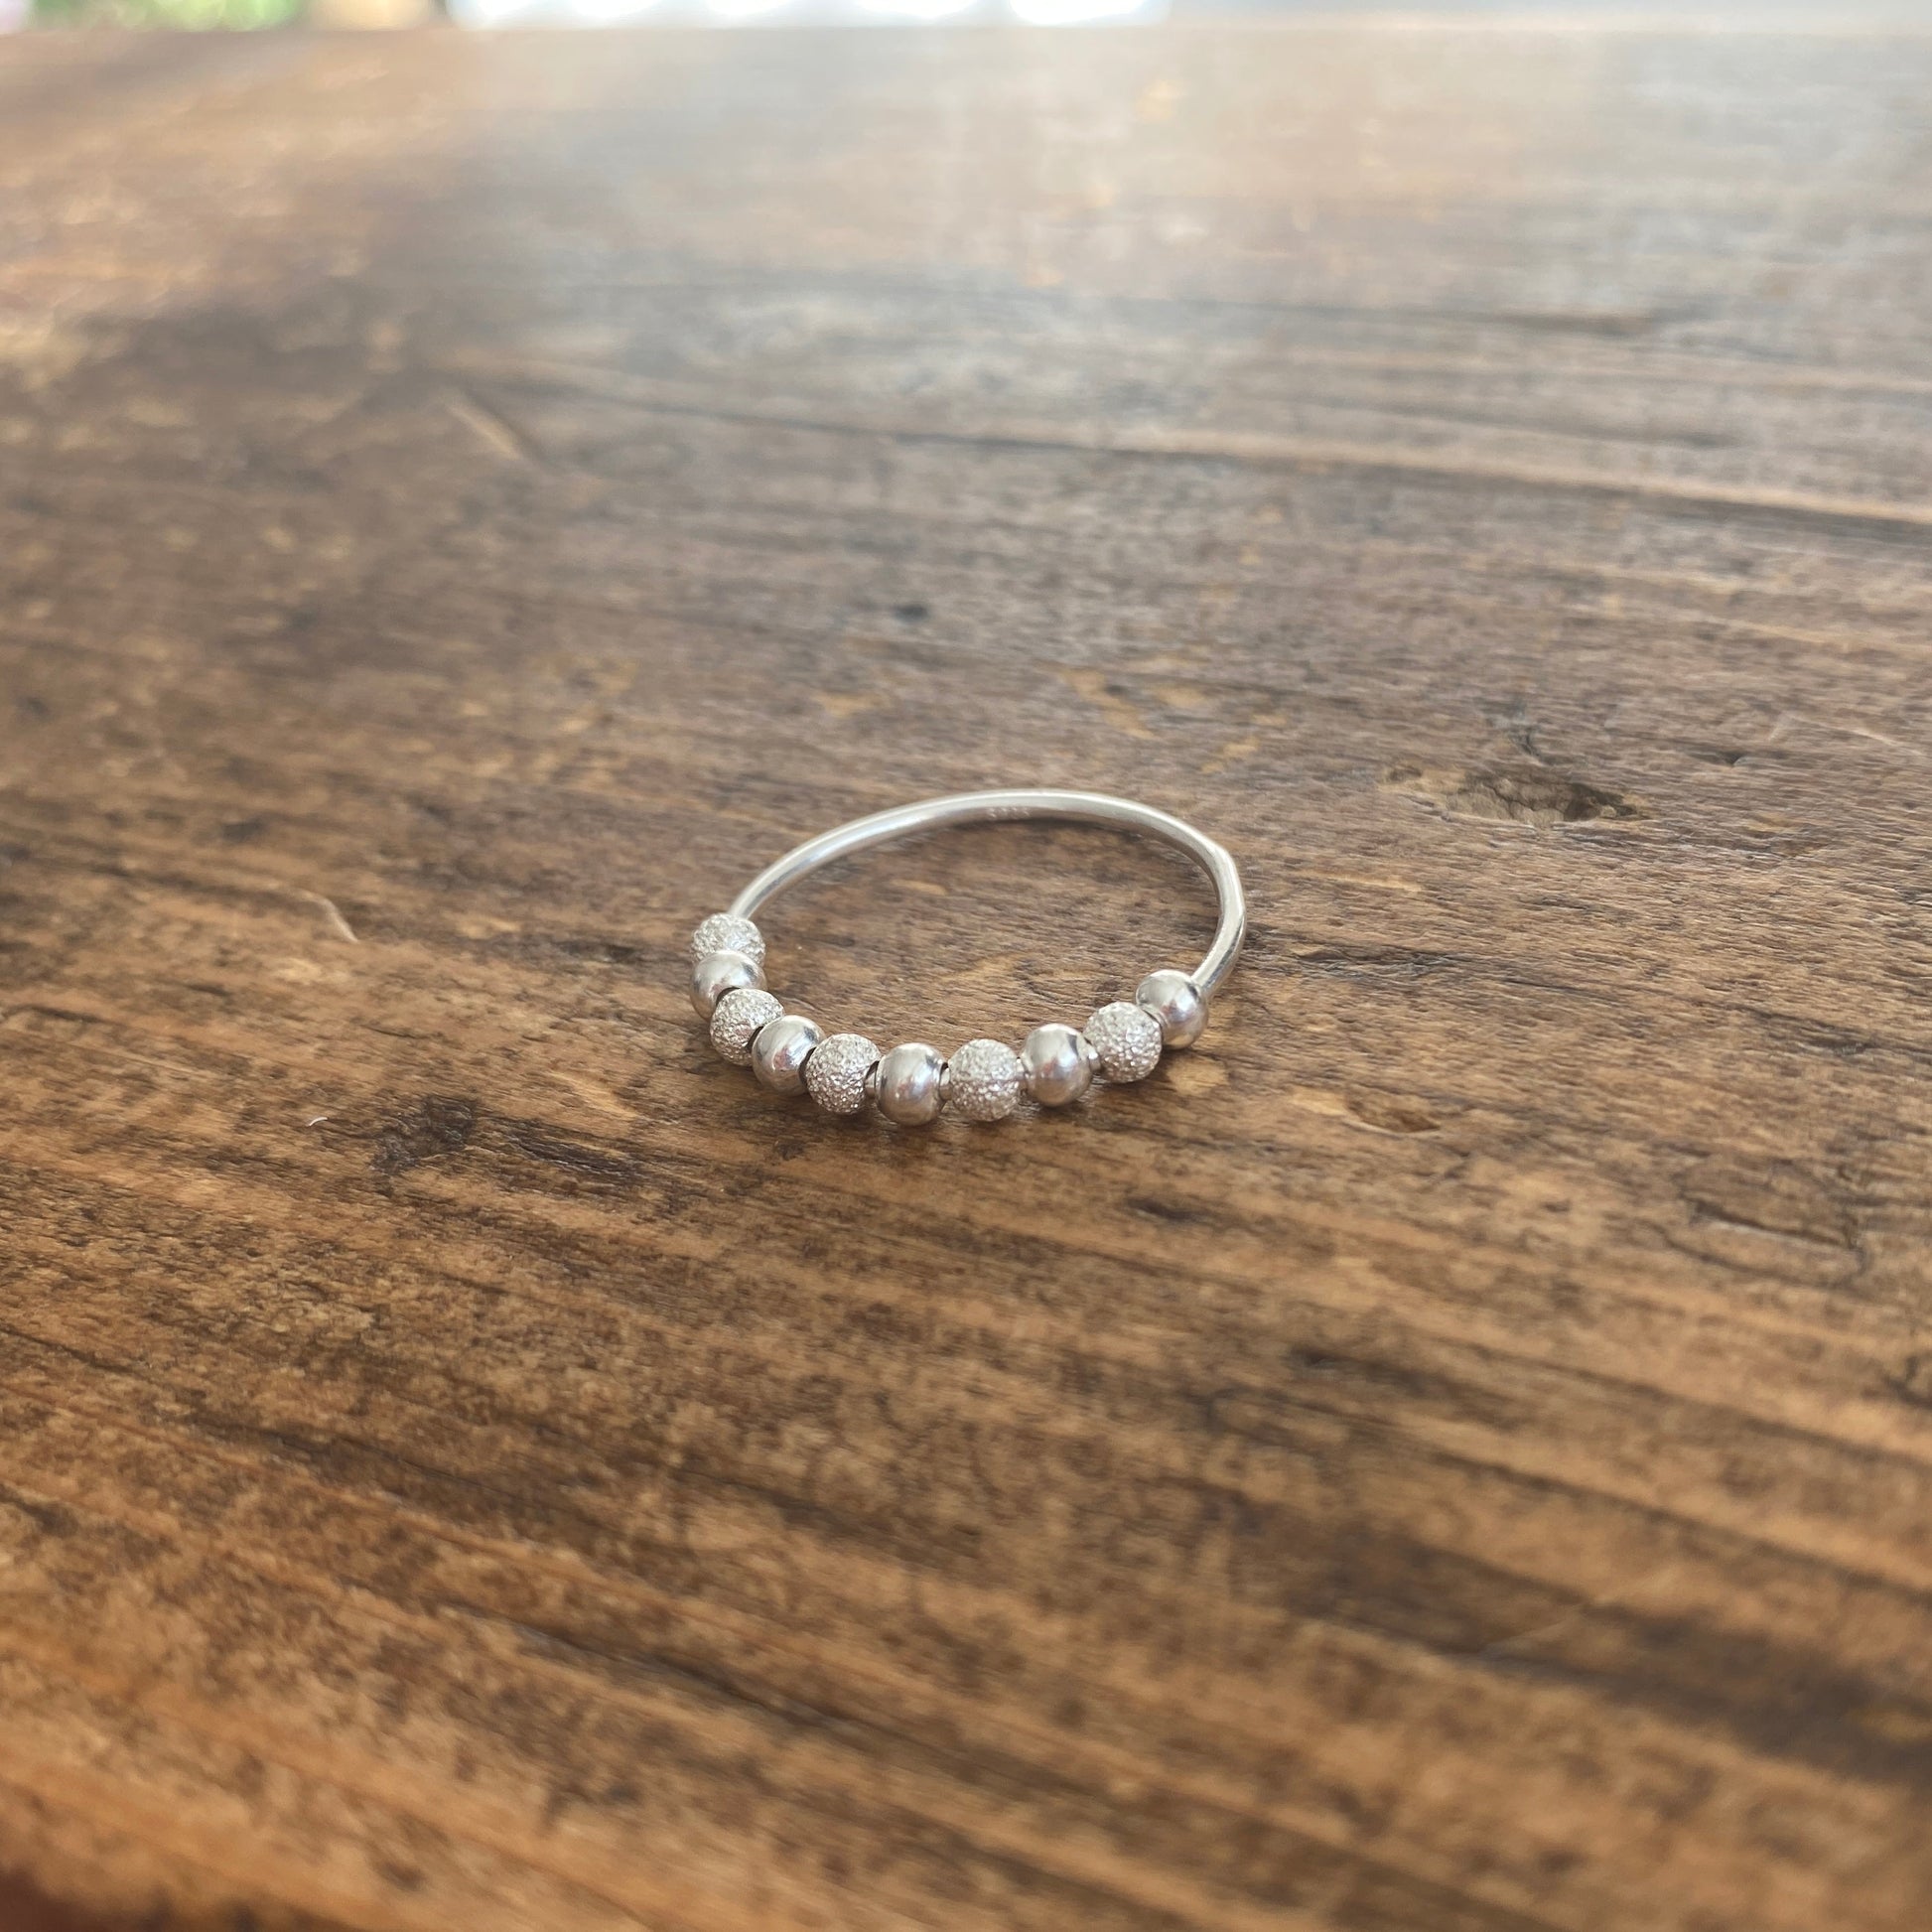 Silver Beaded Anxiety Ring Spinner Ring Soul Inspired 